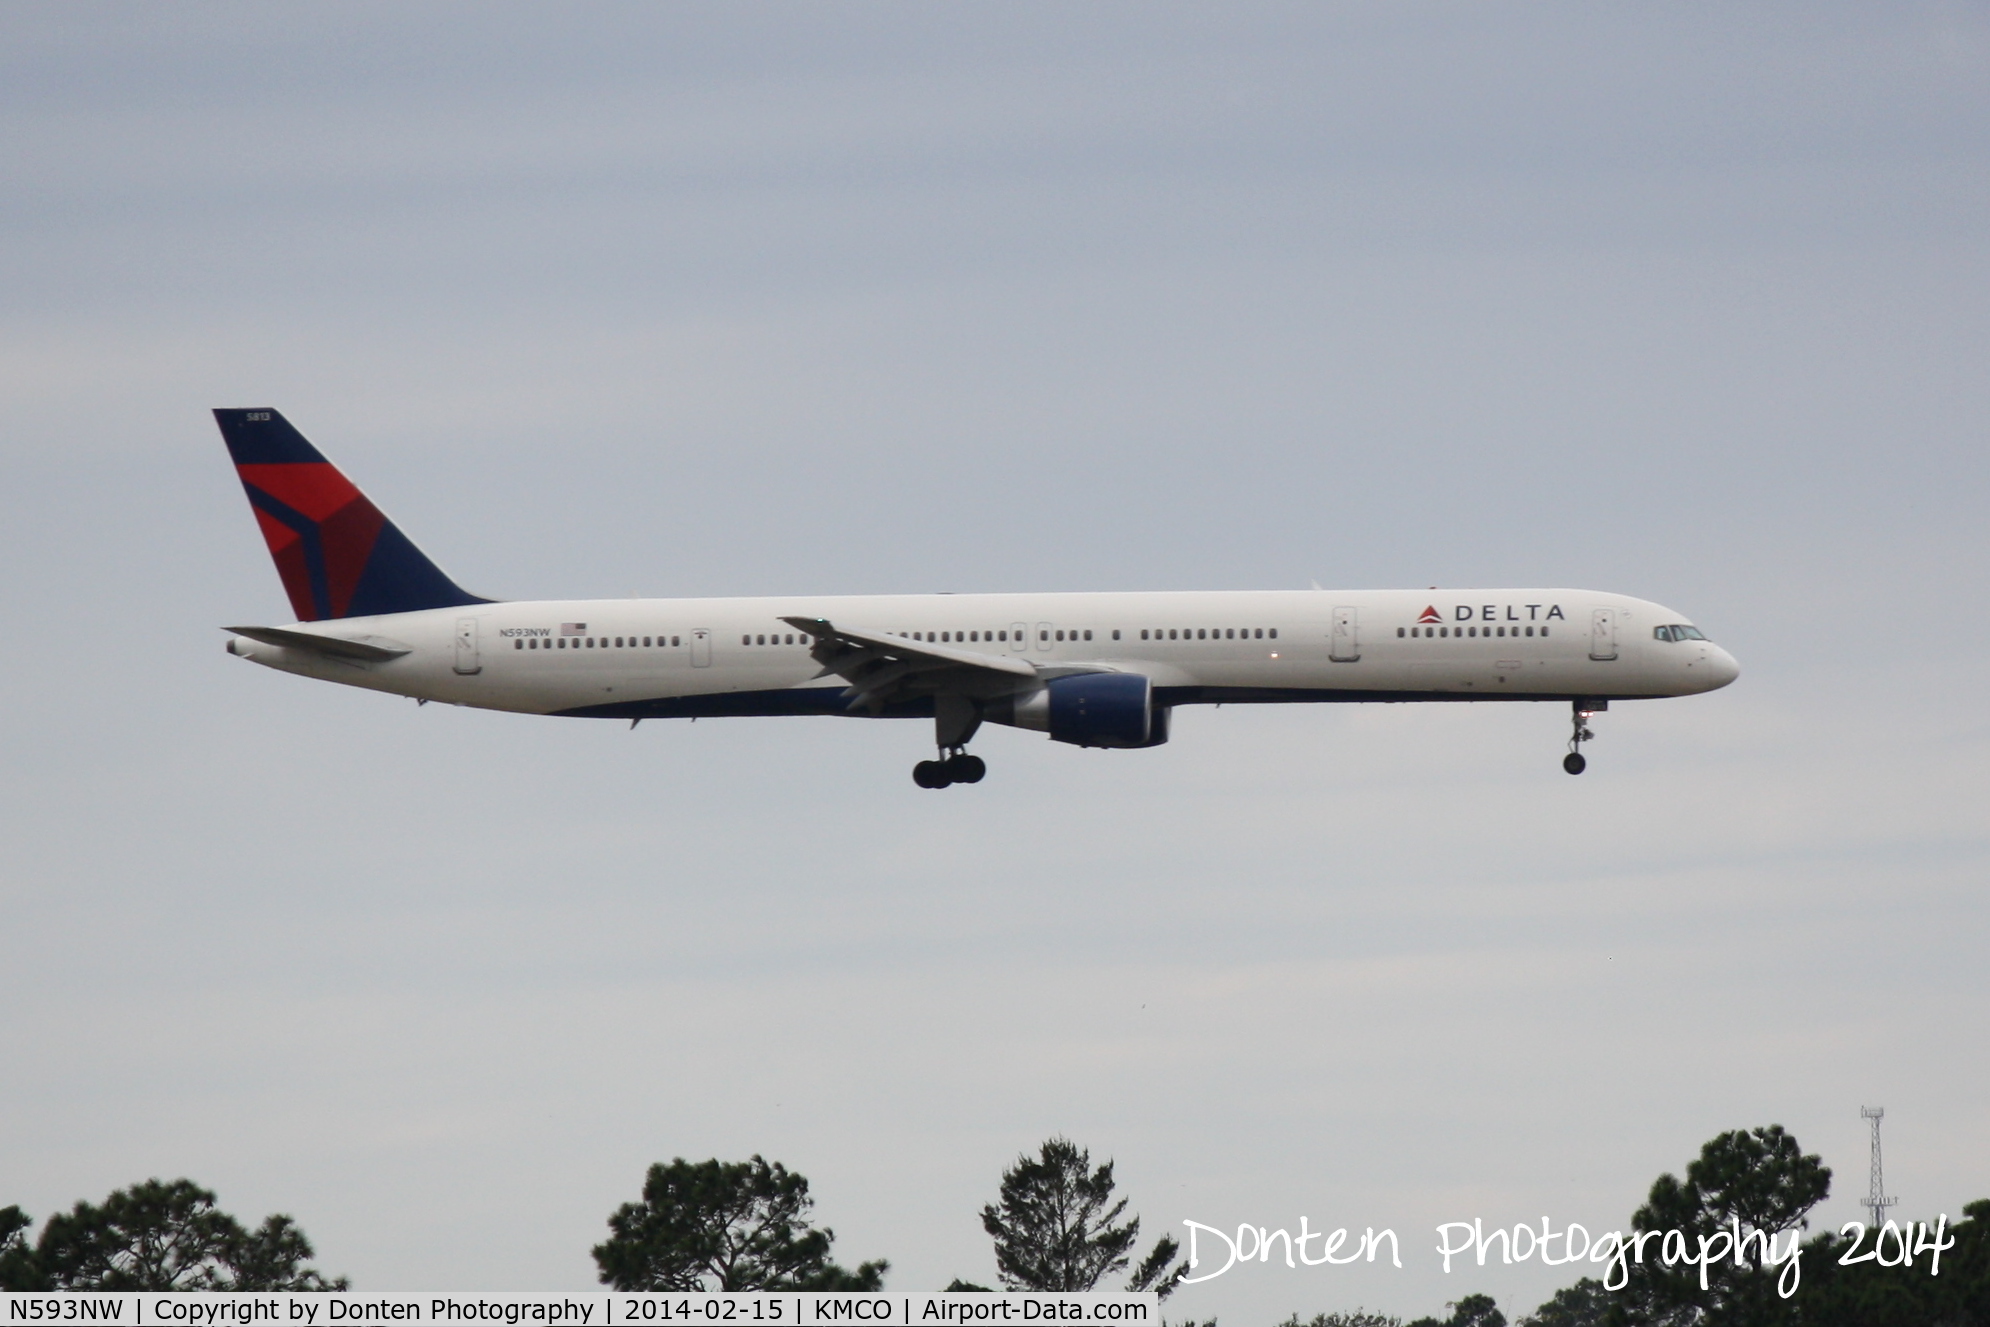 N593NW, 2003 Boeing 757-351 C/N 32993, Delta Flight 1451 (N593NW) arrives at Orlando International Airport following a flight from Detro Metro-Wayne County Airport